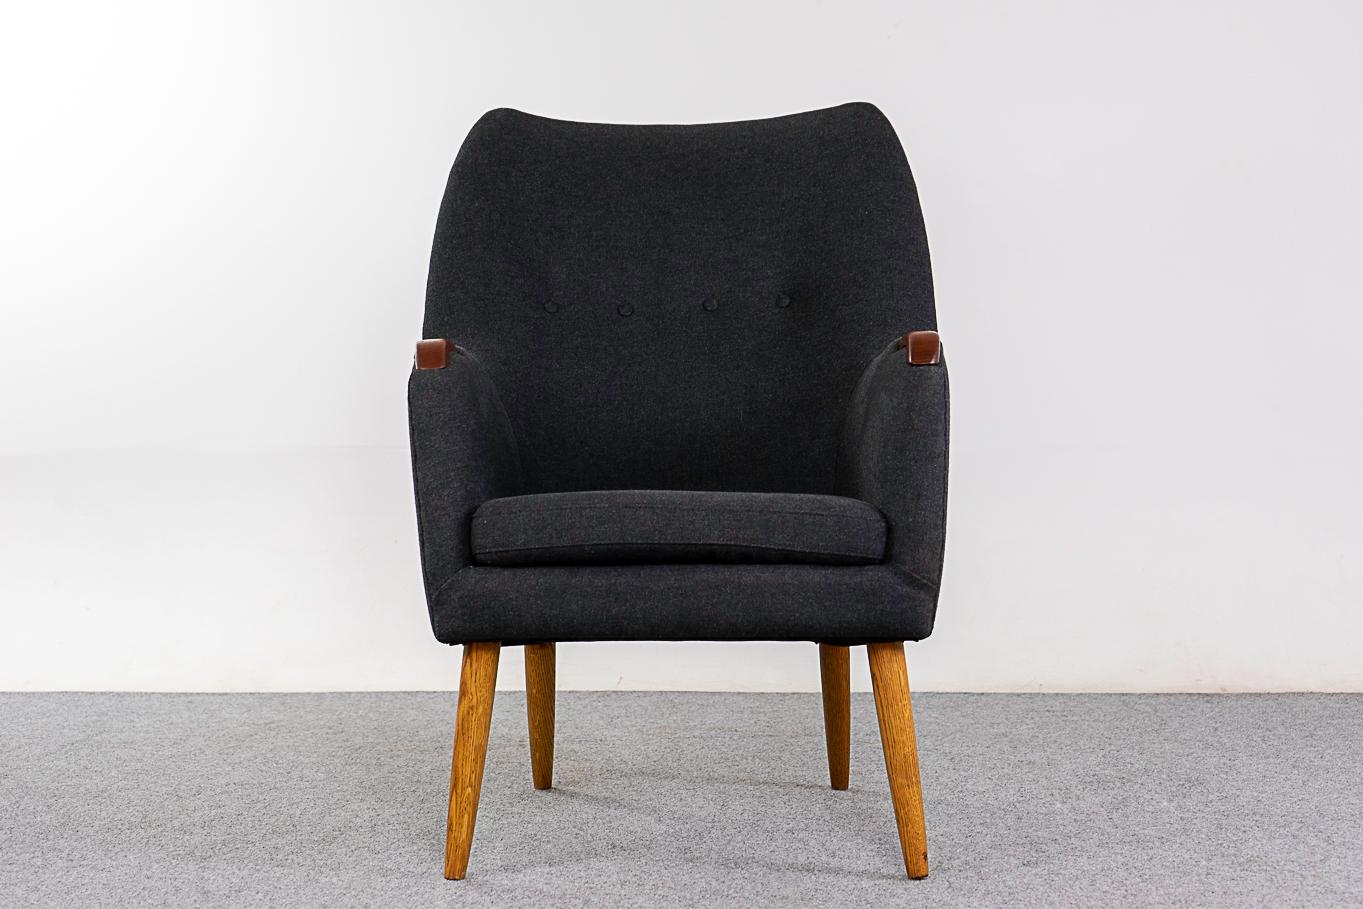 Teak & oak mid-century lounge chair, circa 1960's. Elegant, lovely silhouette with beautifully contrasting solid wood details. New charcoal grey upholstery in a blend of 70% pure new wool and 30% flax. Very comfortable!